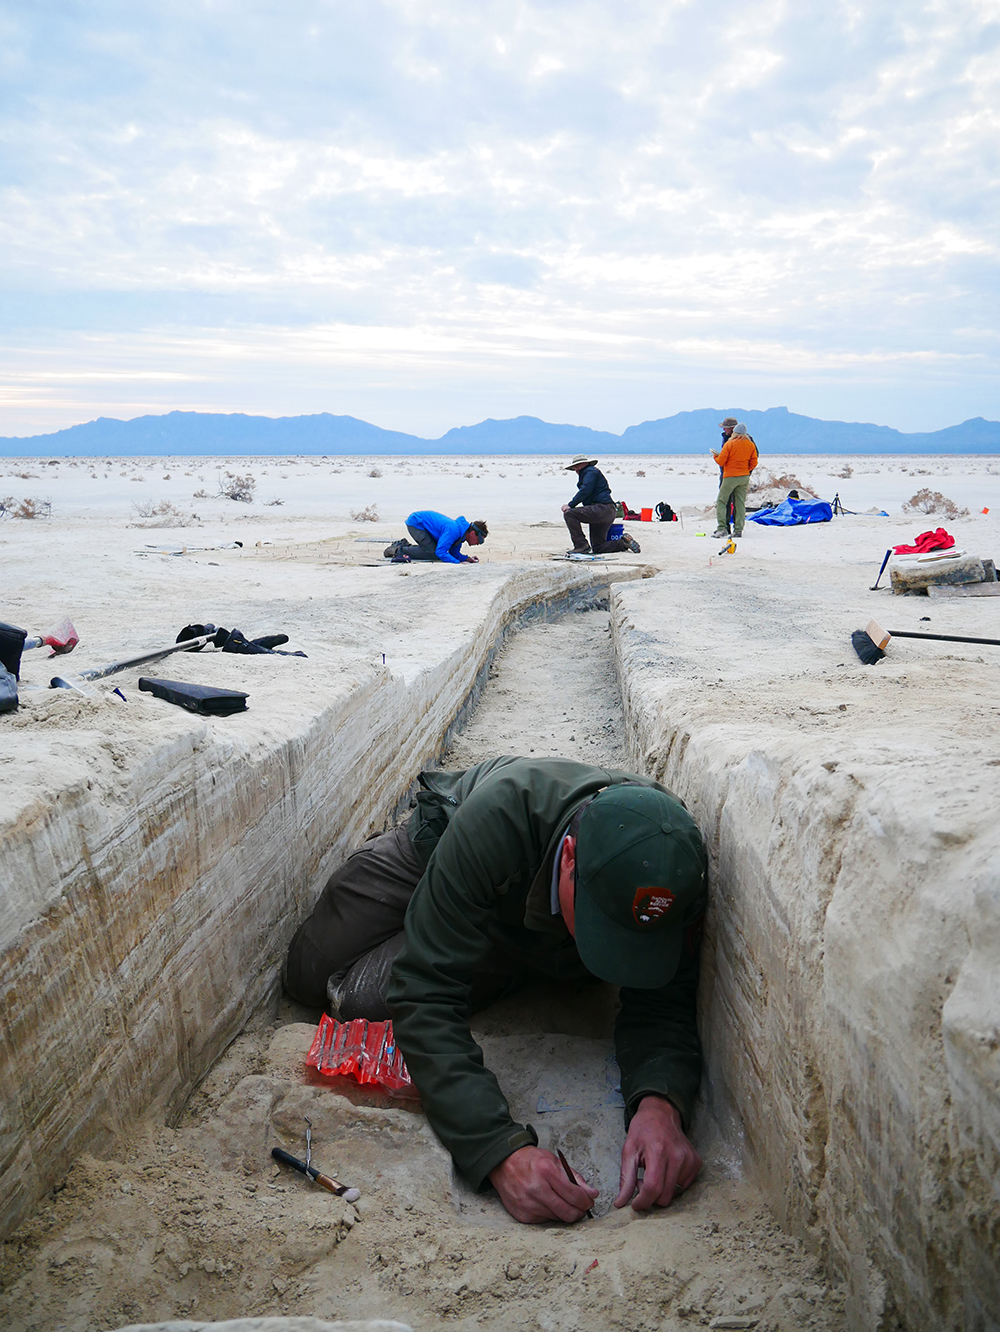 A man wearing a National Park Service uniform sifts through a trench dug in a white sand landscape, with 3 other researchers in the background.